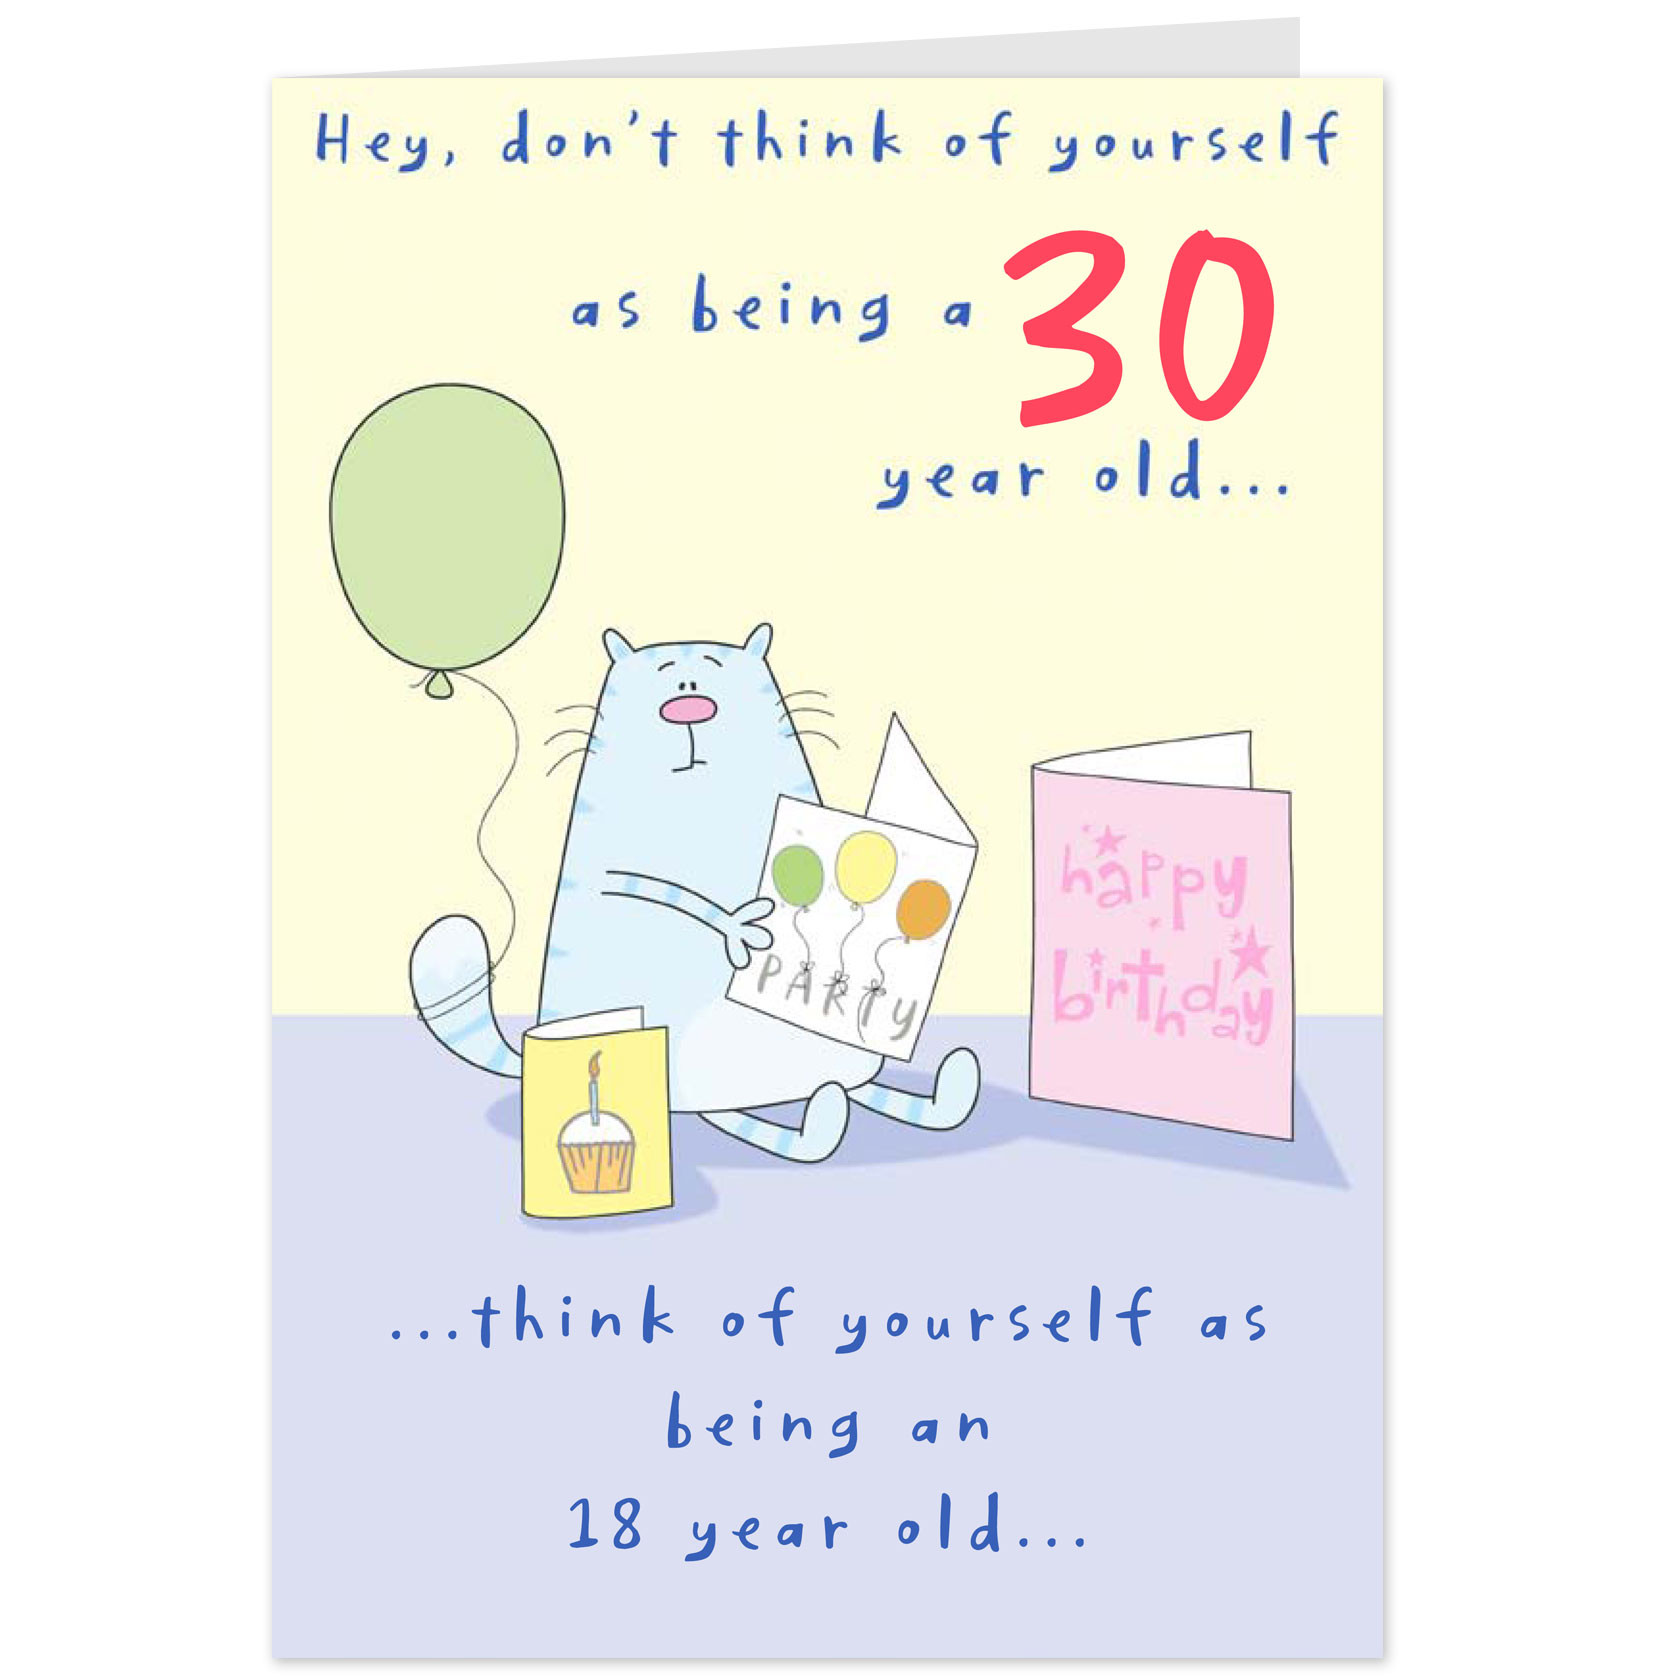 Quotes For Birthdays Cards
 1st Birthday Quotes For Cards QuotesGram